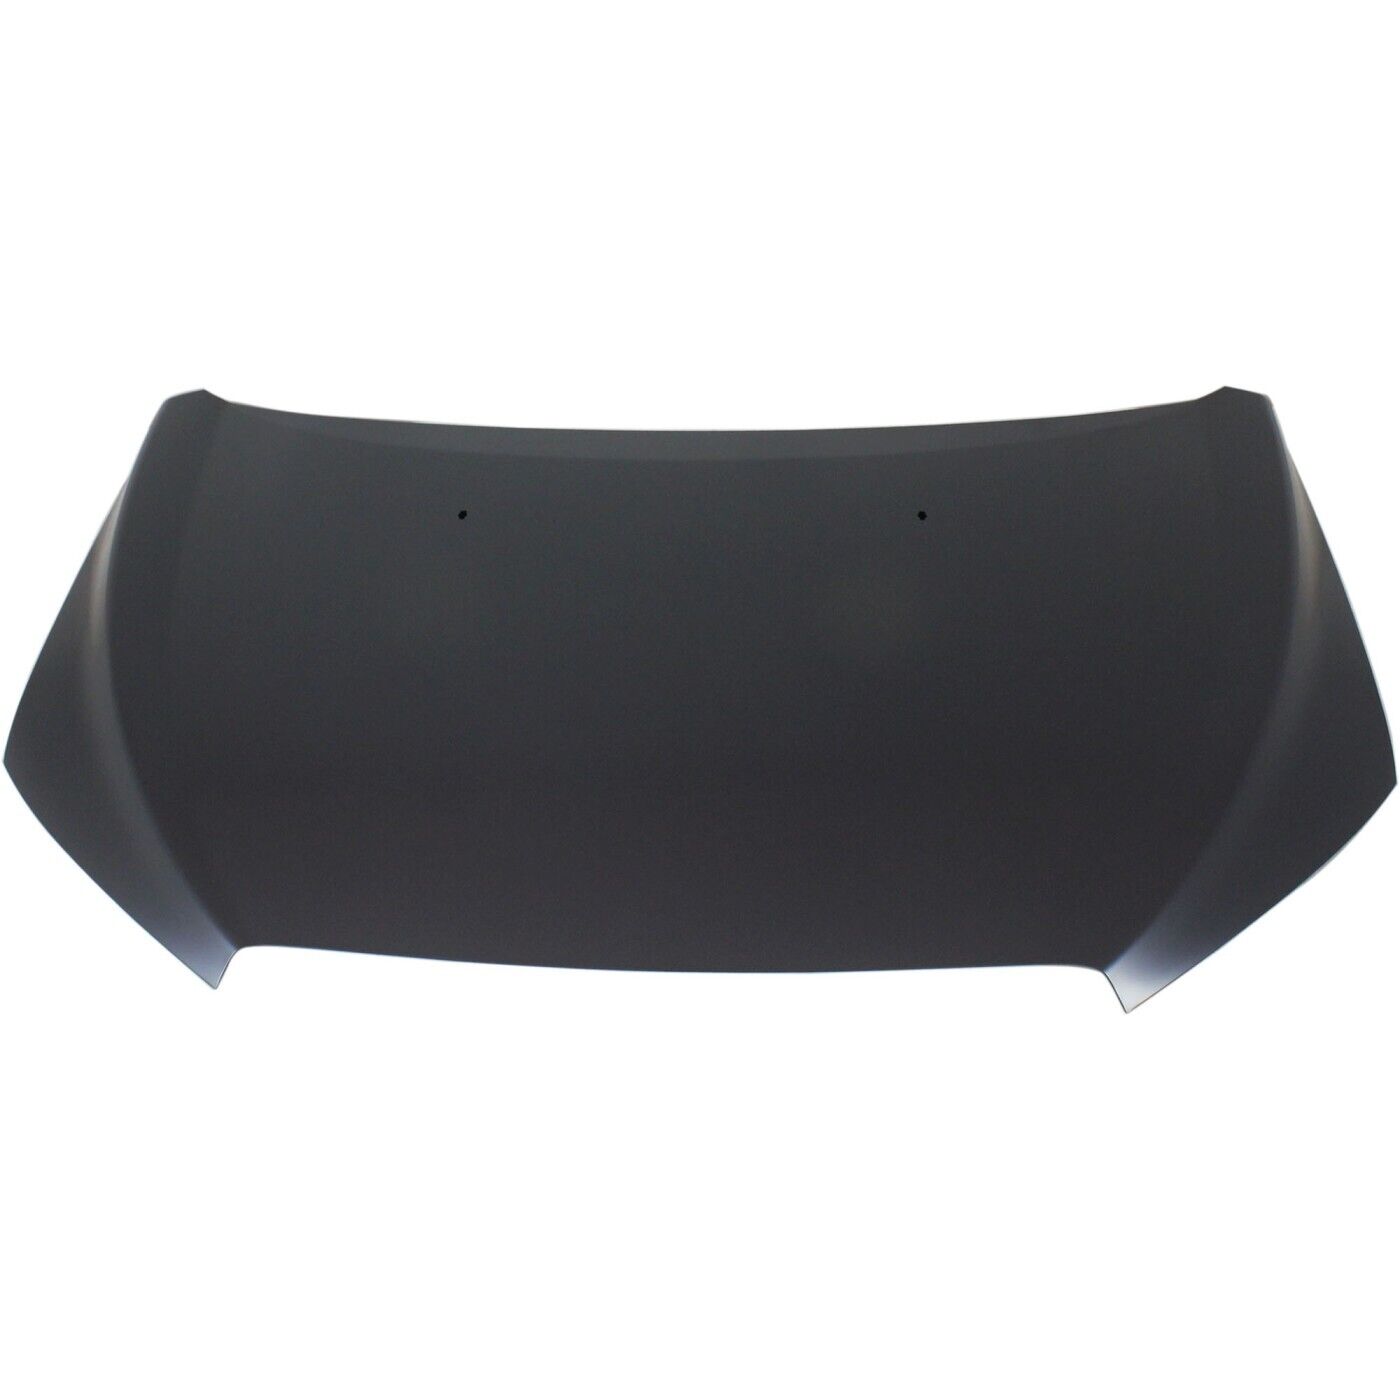 2012-2016 CHEVY SONIC HB Hood Painted to Match